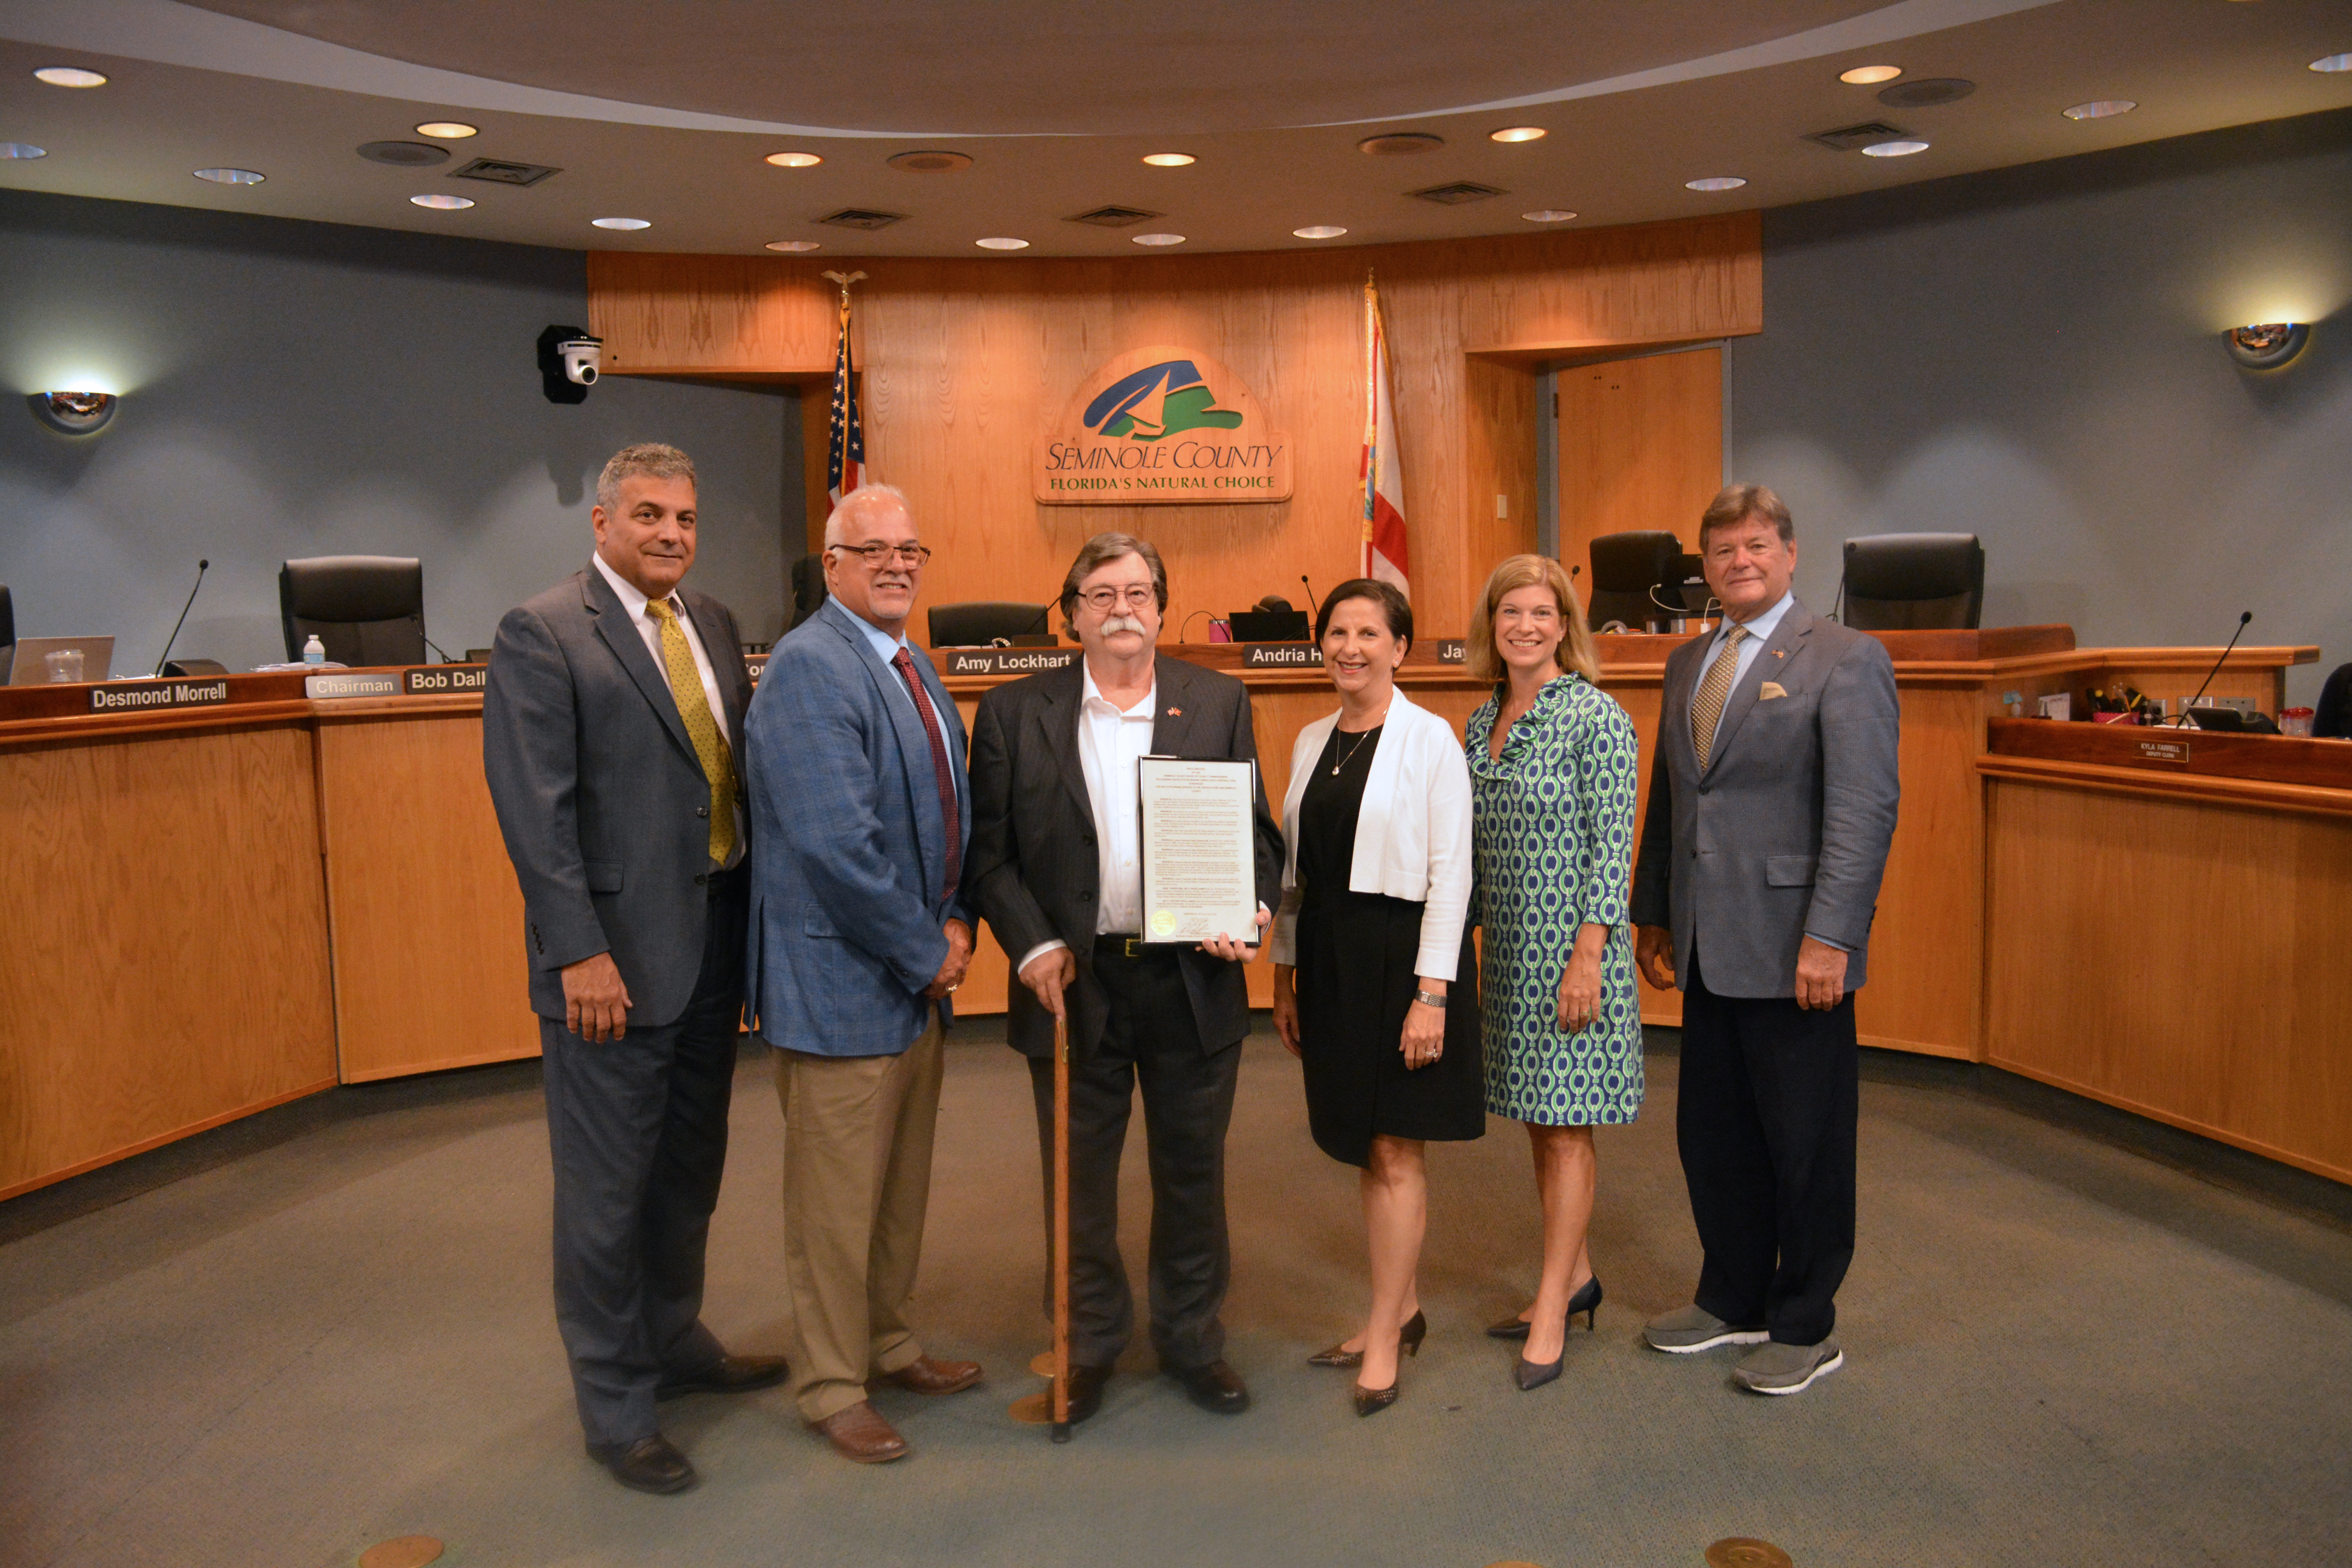 Proclamation - Proclaiming Lance Corporal John Eckenrode, United States Marine Corps, as Seminole County’s July Veteran of the Month.